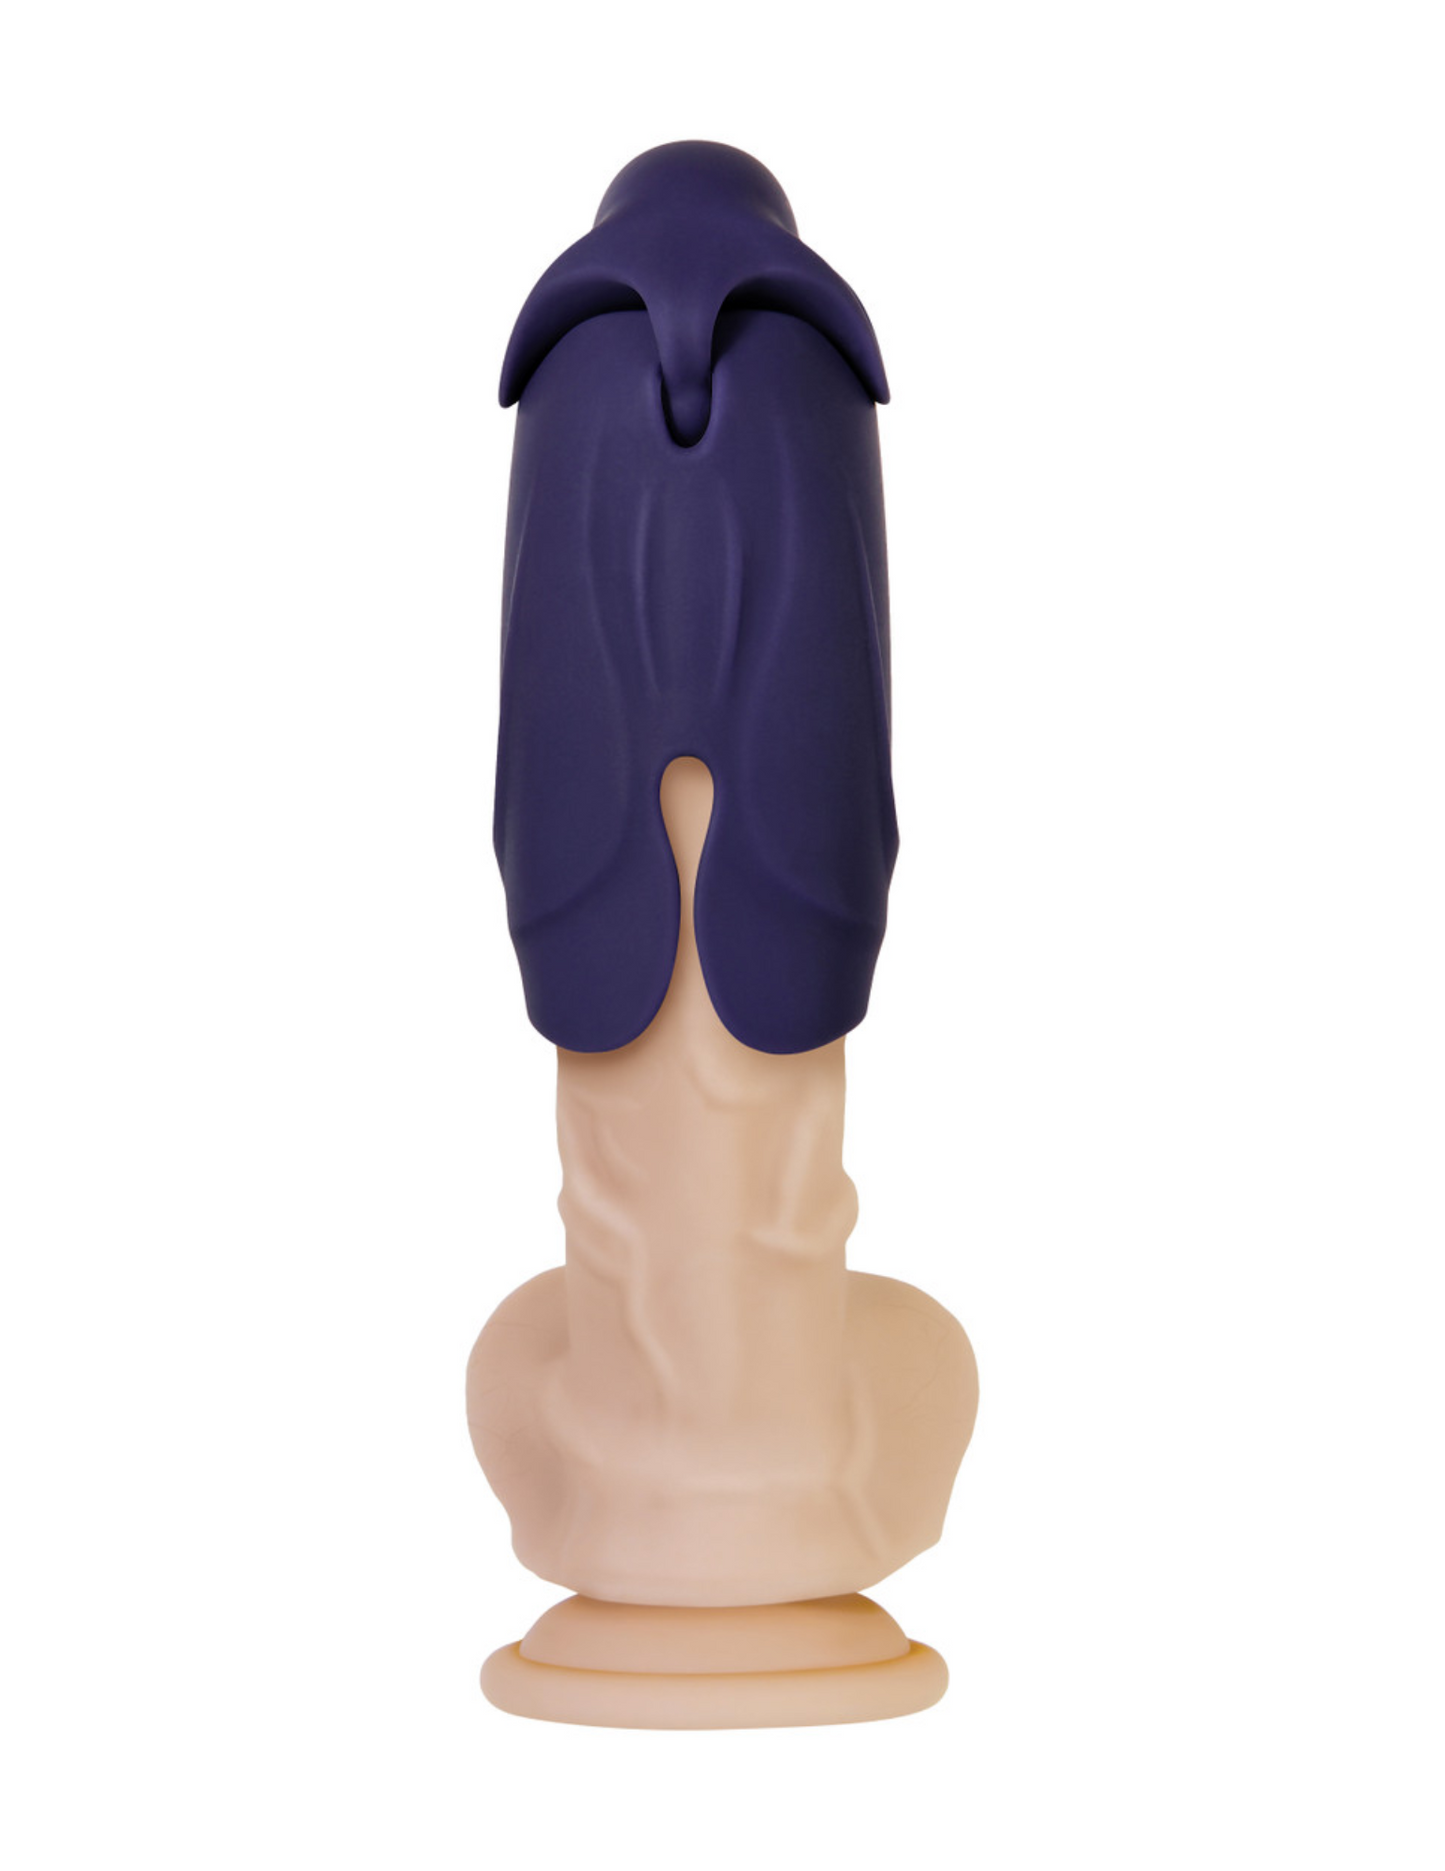 Photo of the Different Strokes Rechargeable Vibrating Masturbator from Zero Tolerance on a dildo to show one of the ways it can be worn with the "top" closed.